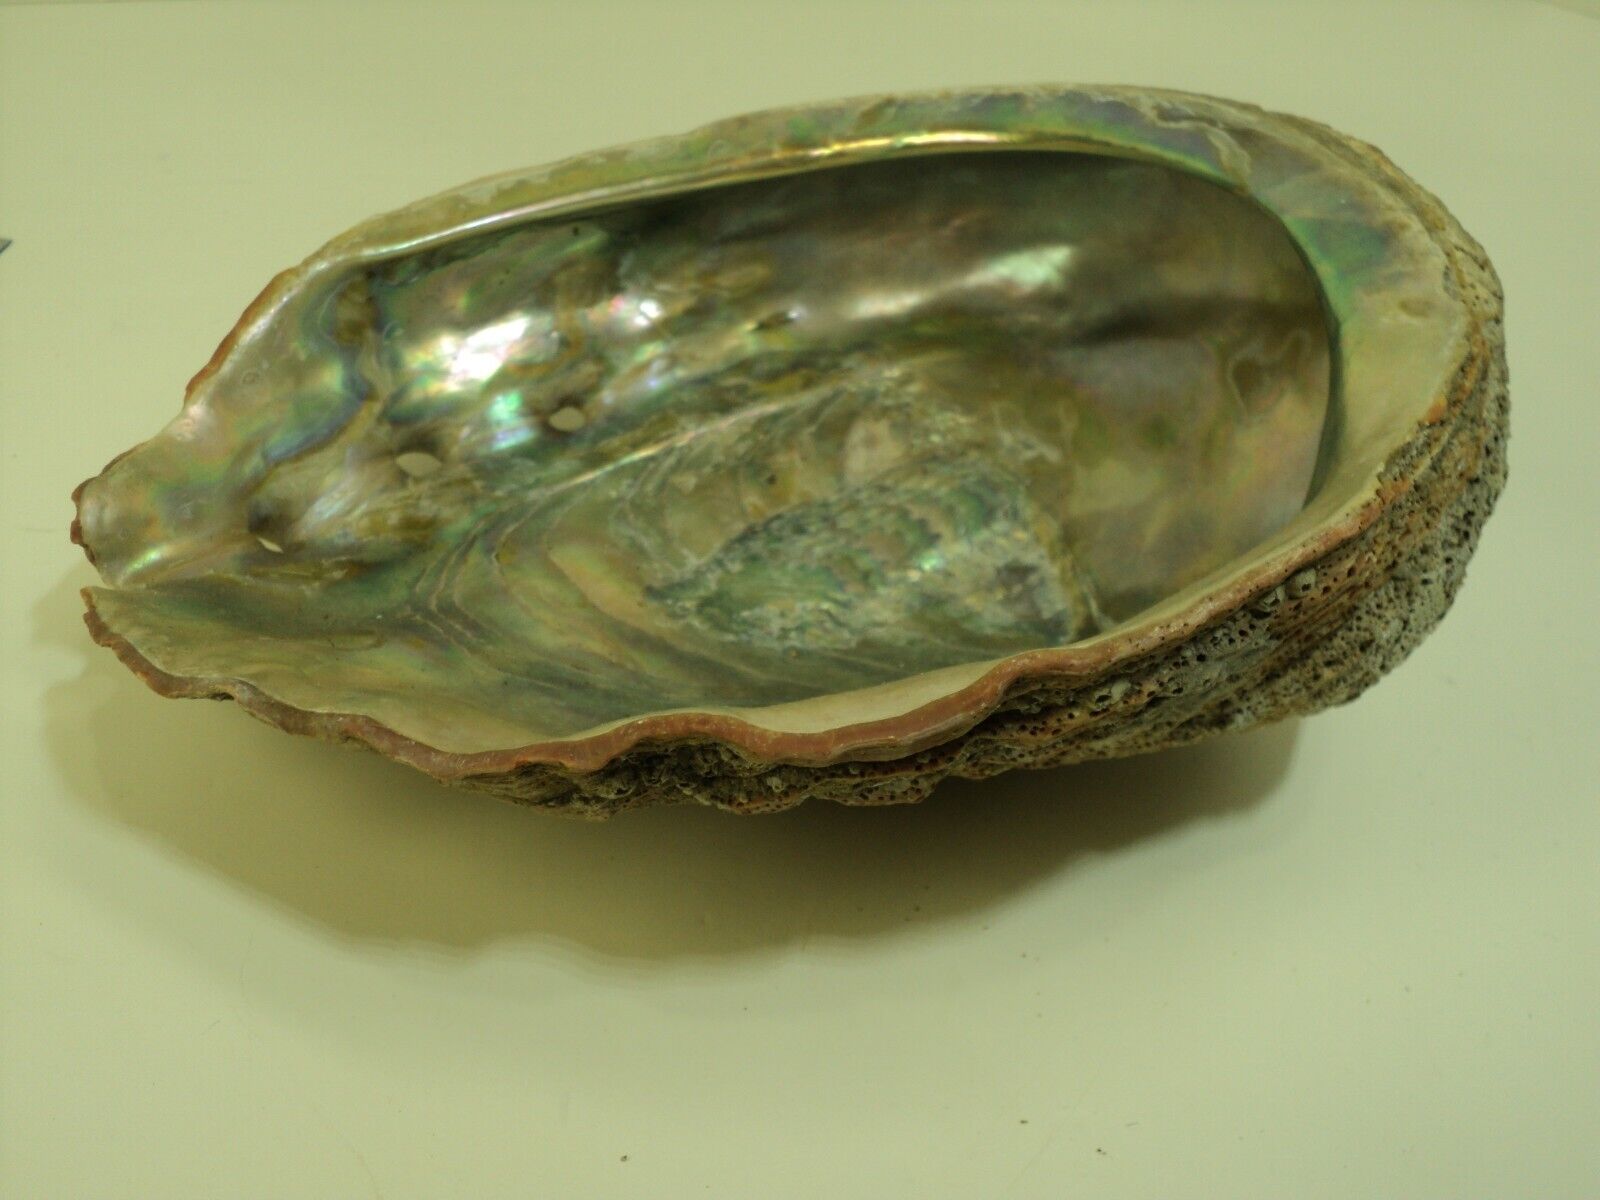 Large Abalone shell,7.5 inches by 6 inches. Very nice